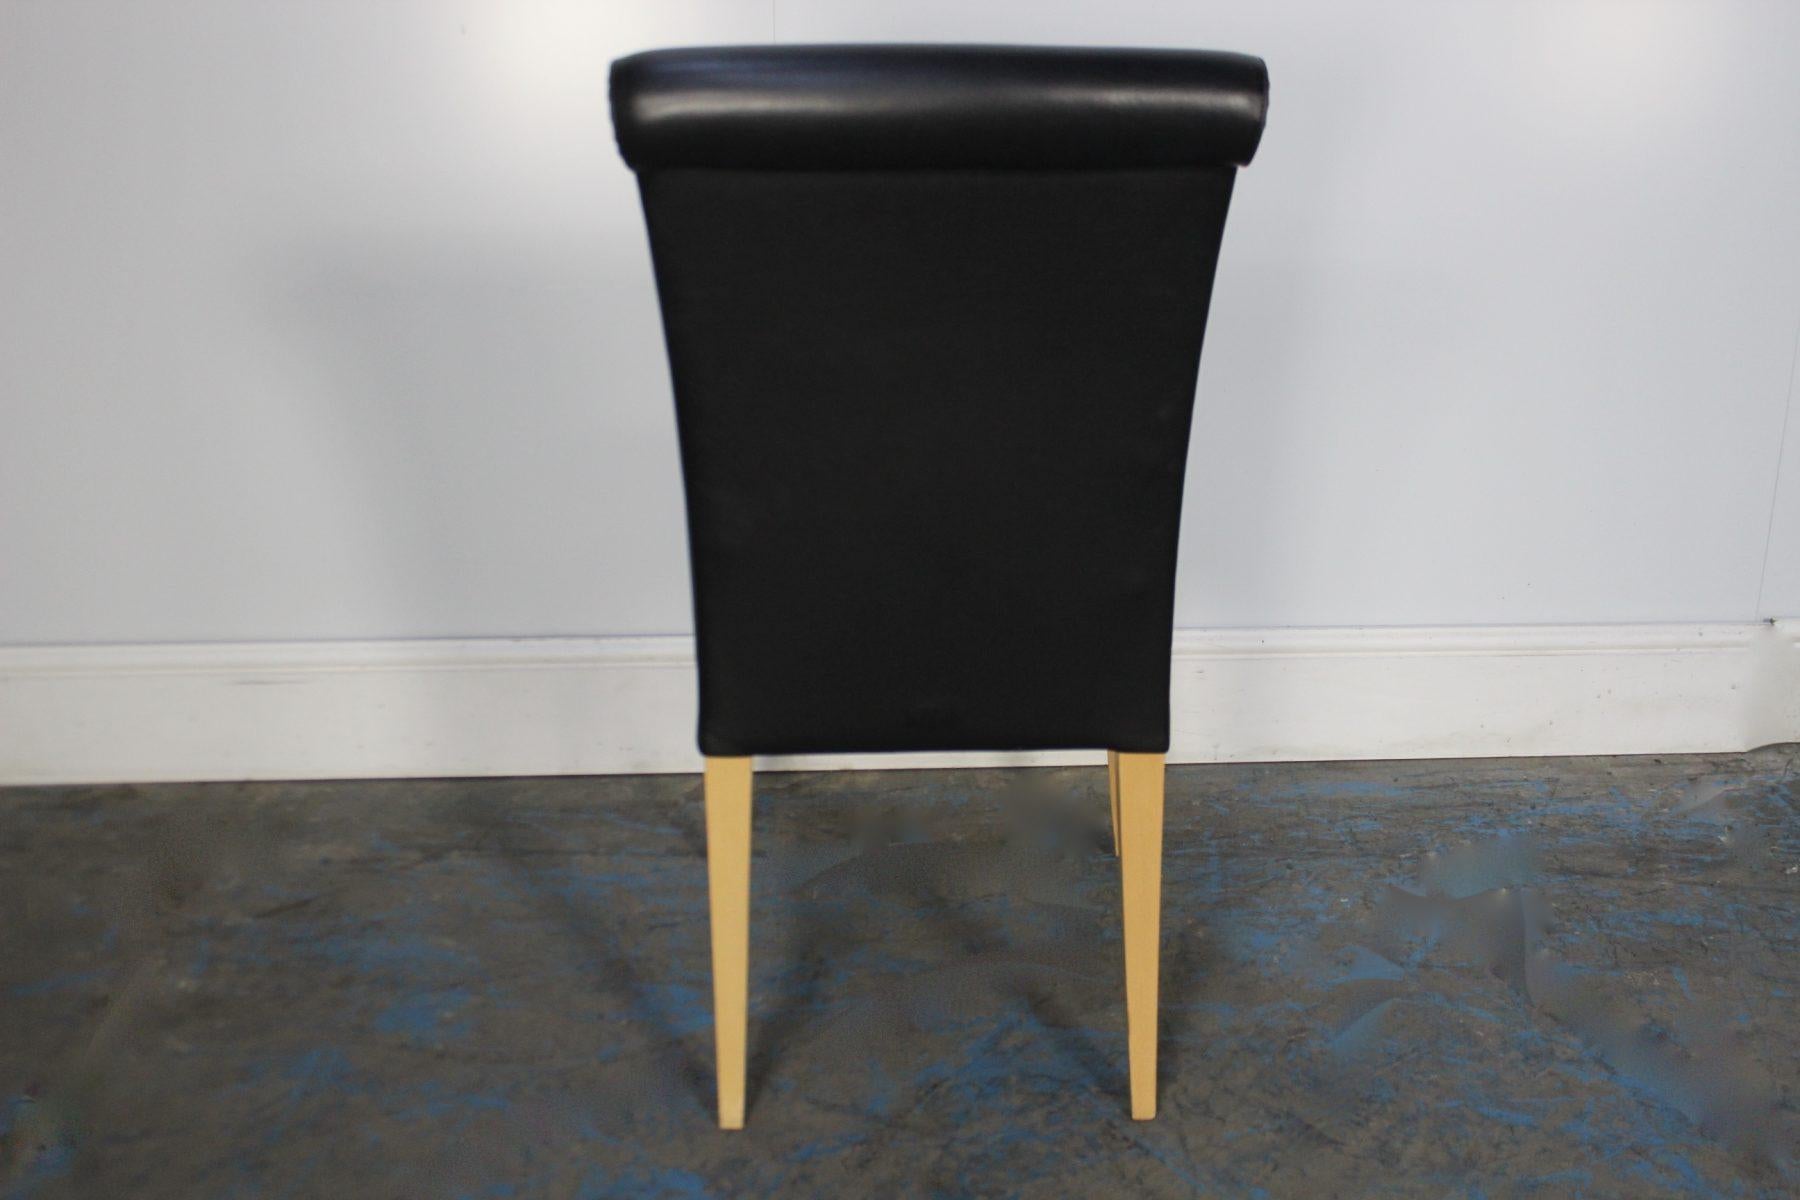 Superb Suite of 12 Poltrona Frau “Vittoria” Dining Chairs in Black “Pelle Frau” For Sale 2